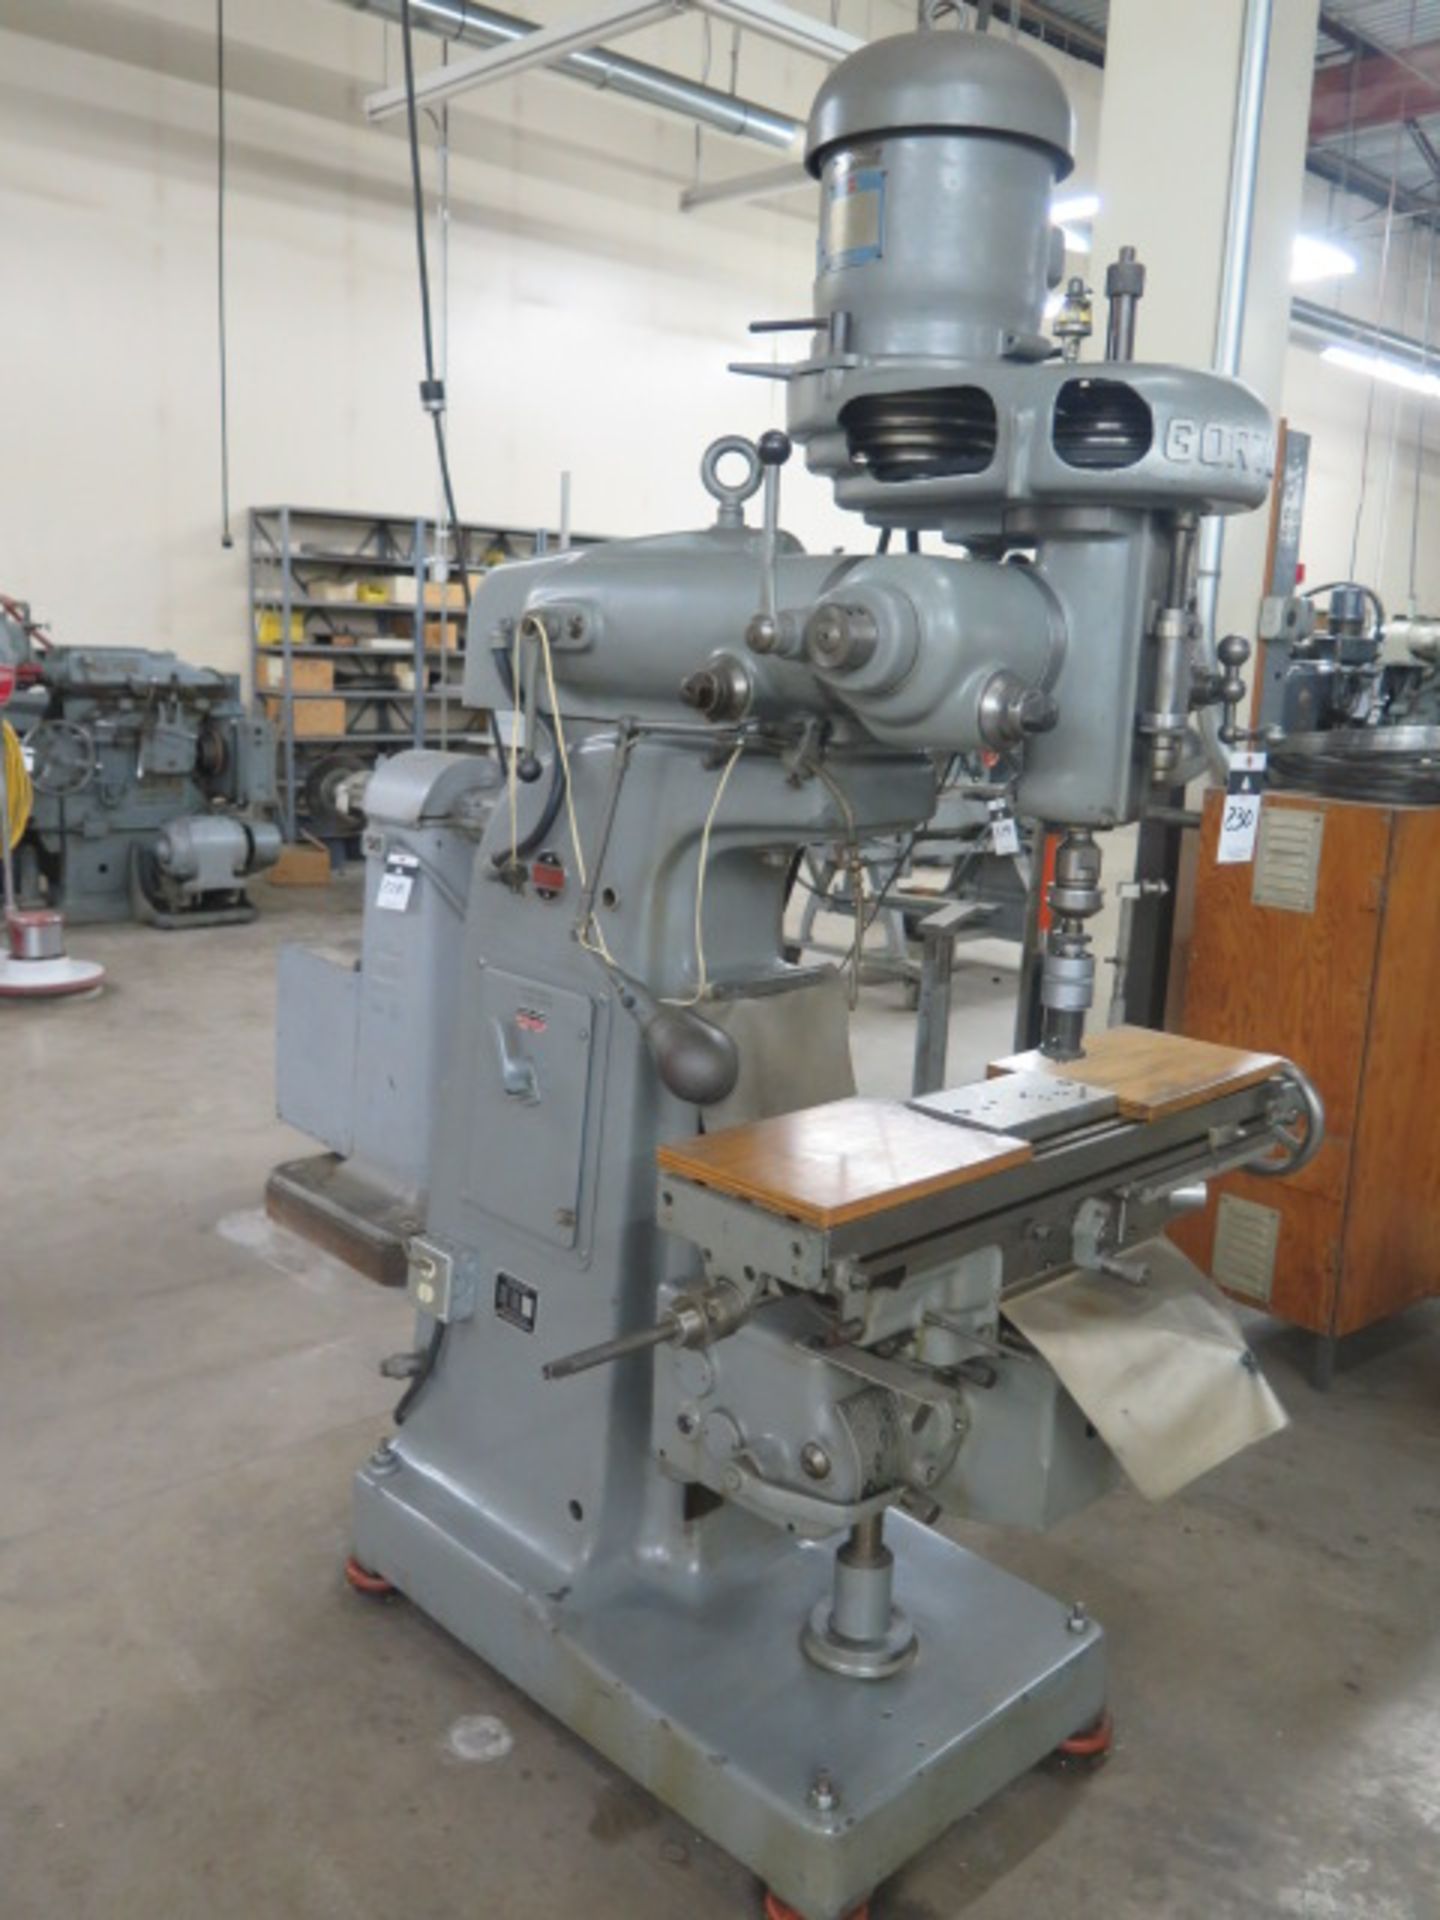 Gorton No. 8 ½ D Vertical Mill s/n 35931 w/ 2Hp Motor, 6-Speeds, Power Feeds, 9 ¼” x 34” Table - Image 2 of 8